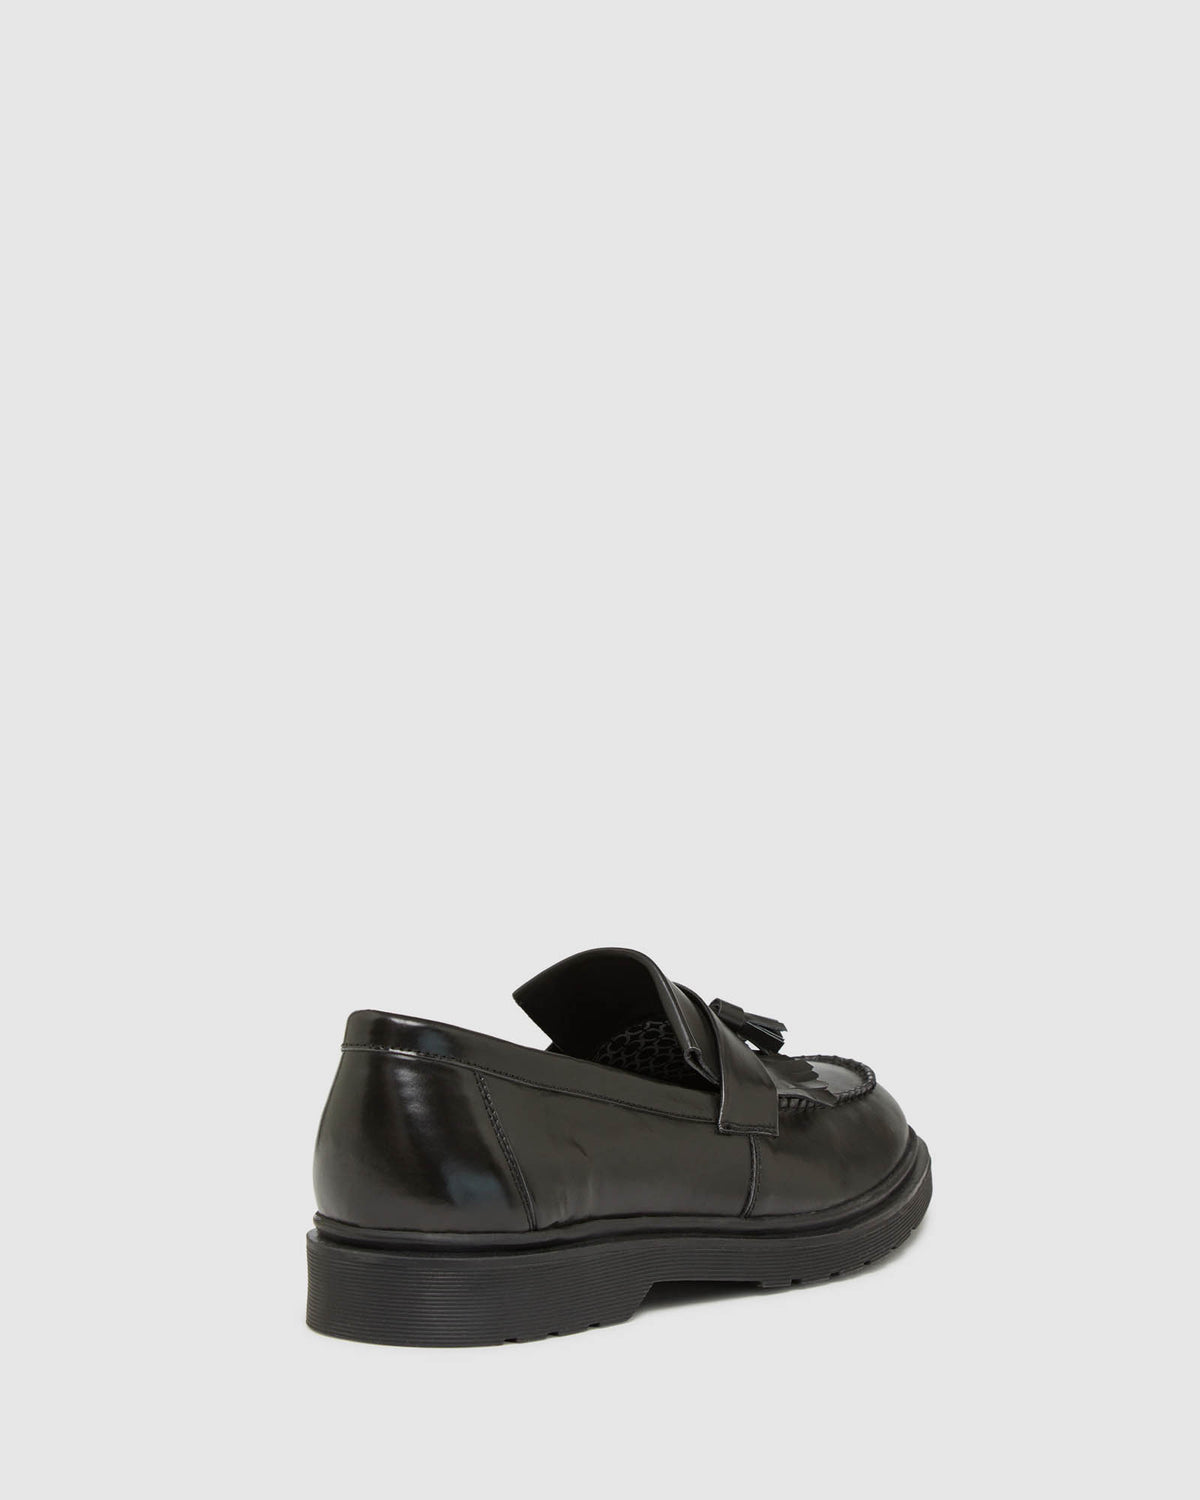 REMY LEATHER PENNY LOAFER SHOES